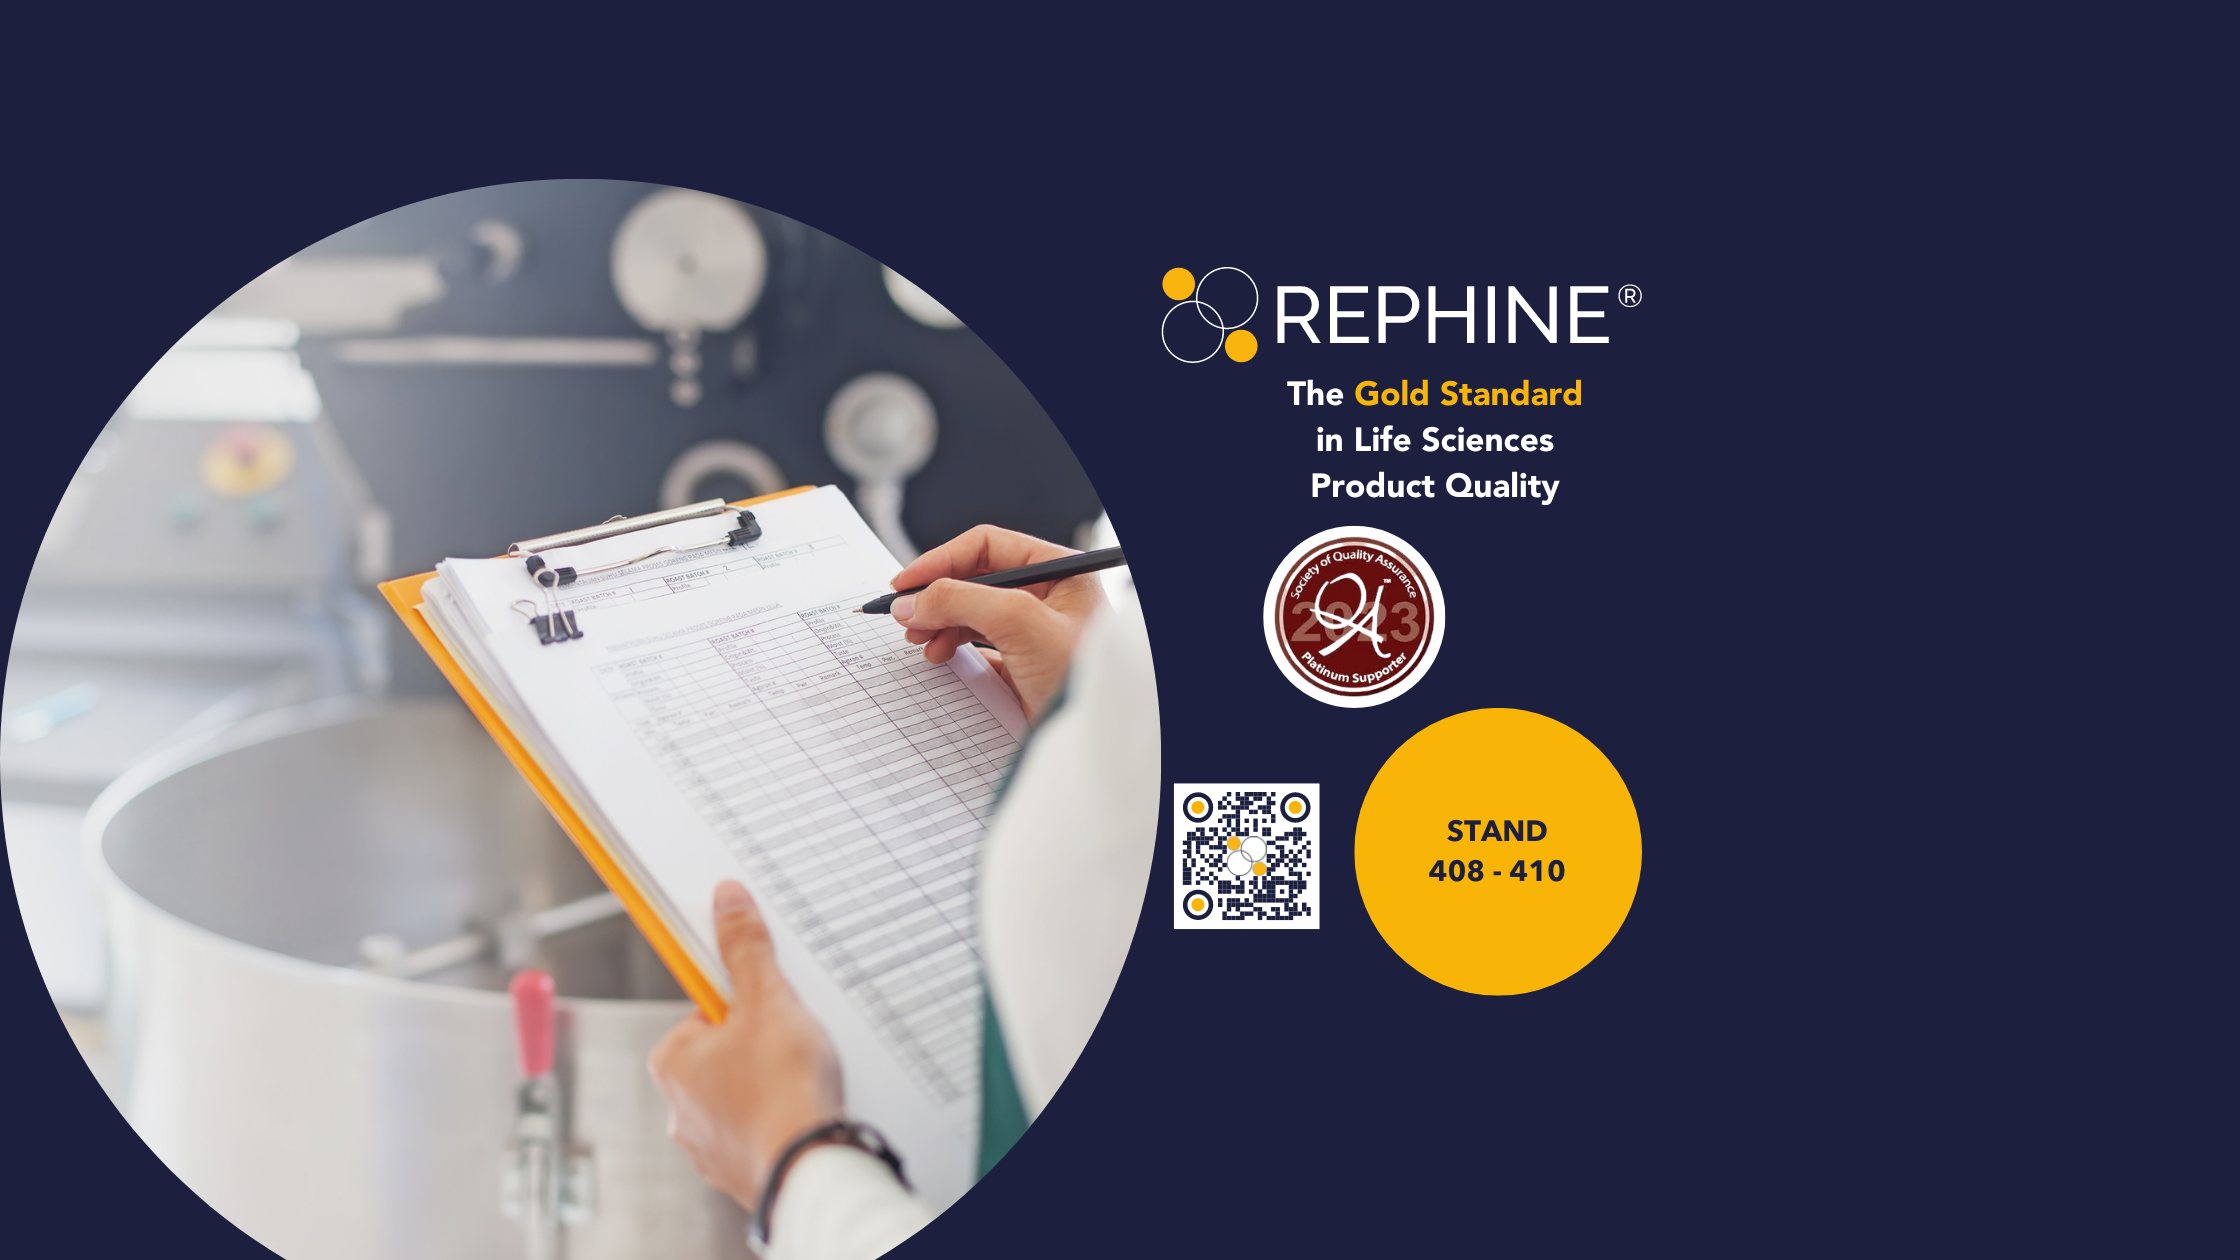 Rephine to sponsor Global Quality Assurance Conference